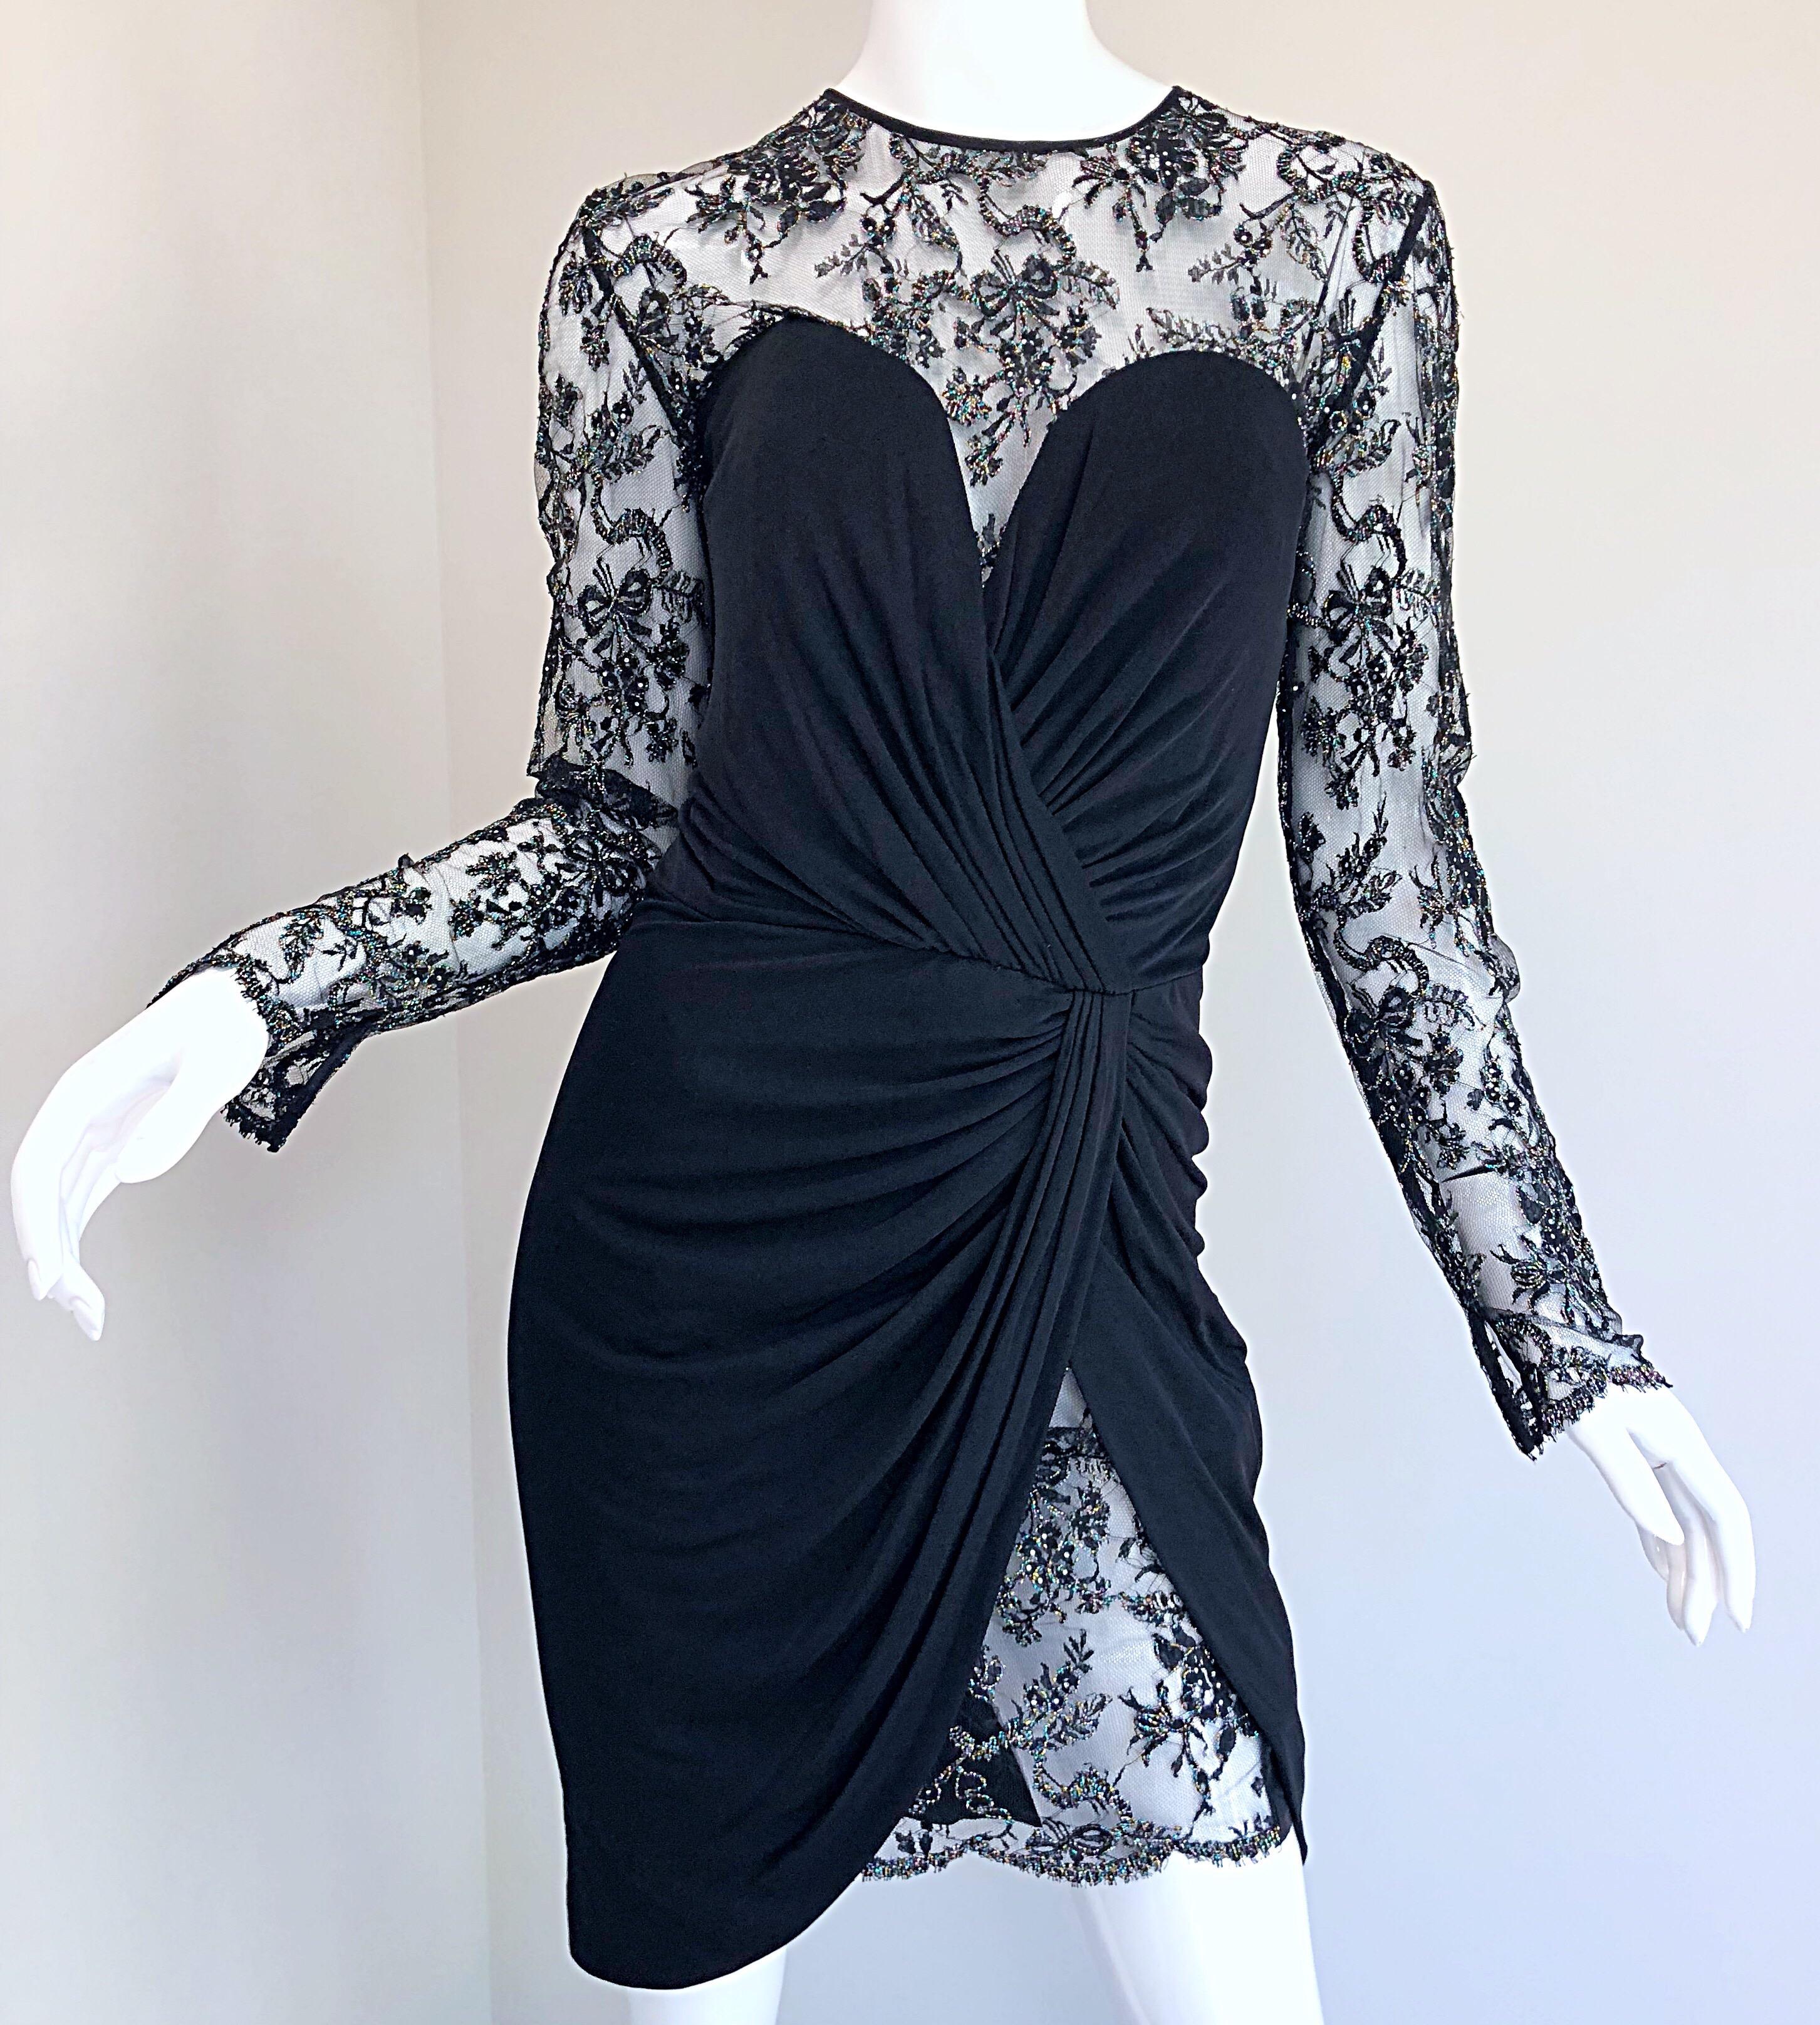 Vintage Vicky Tiel Couture 1980s Black Silk Jersey + Lace Rhinestone Dress For Sale 6